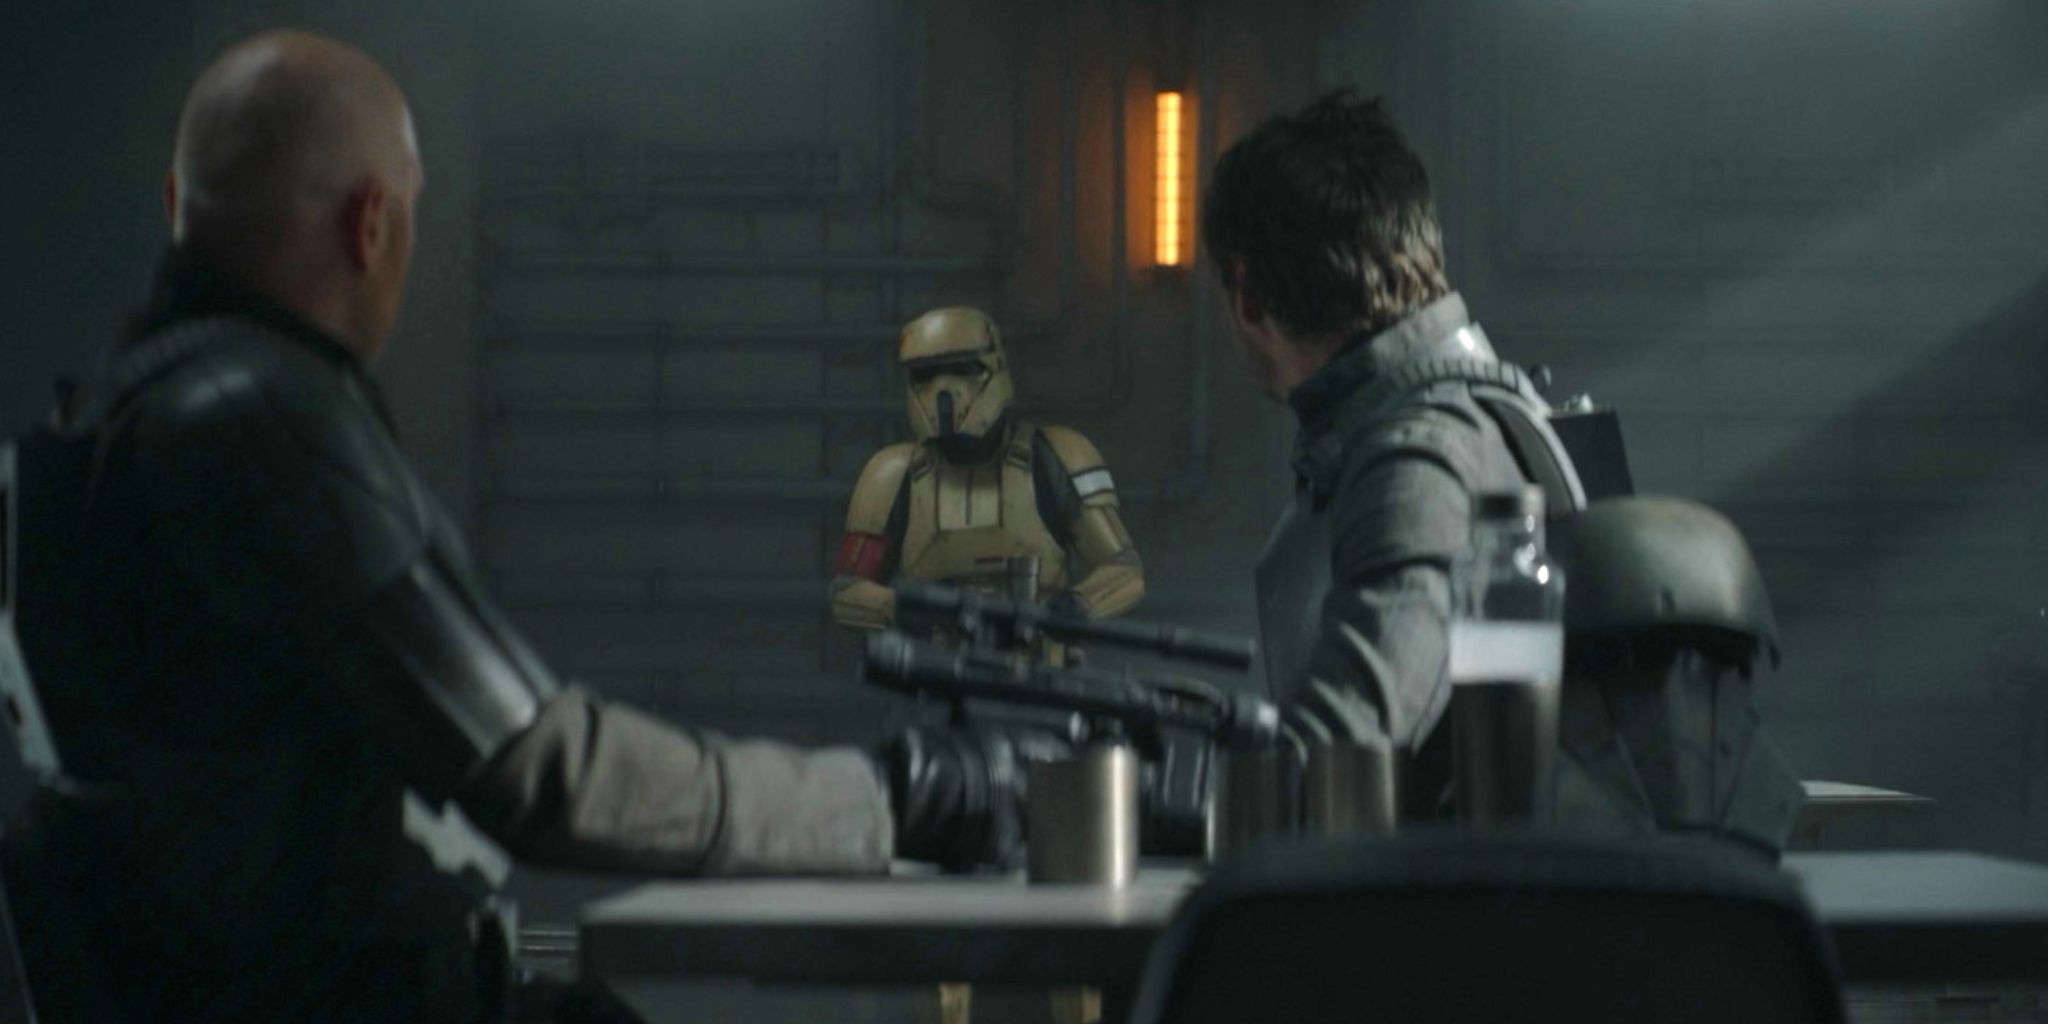 Bill Burr as Migs Mayfeld and Pedro Pascal as Din Djarn look at an Imperial scout trooper on Morak in The Mandalorian season 2 episode 7